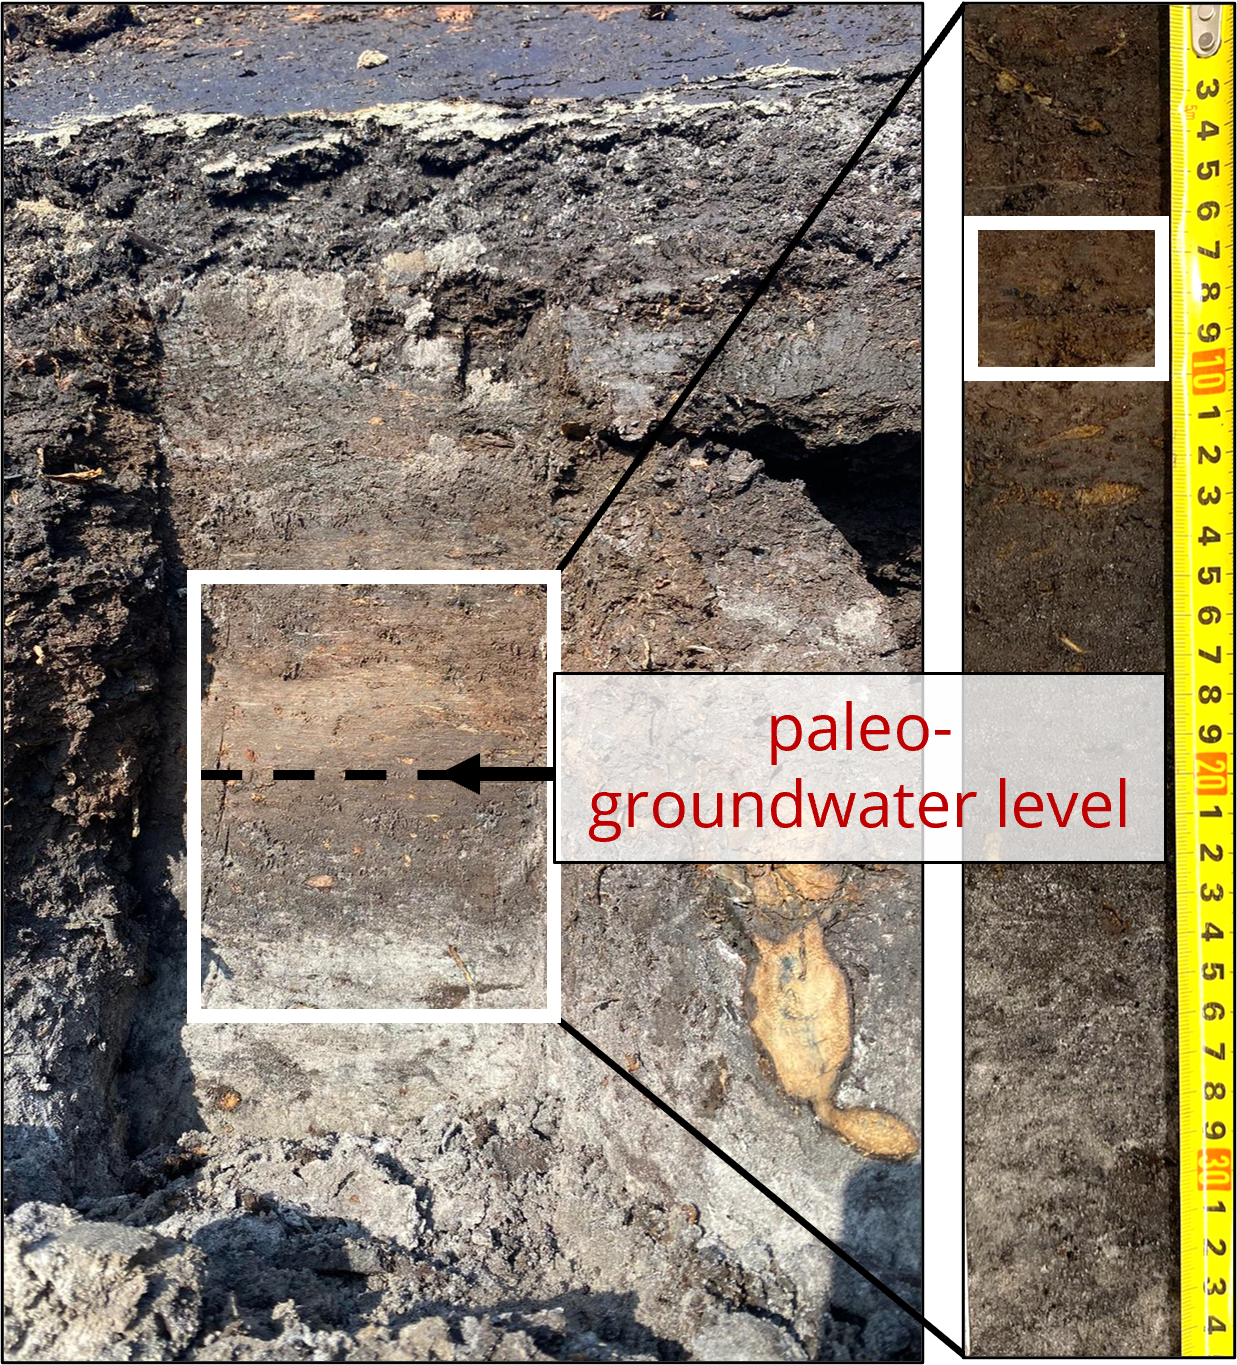 Paleo groundwater levels in Urk